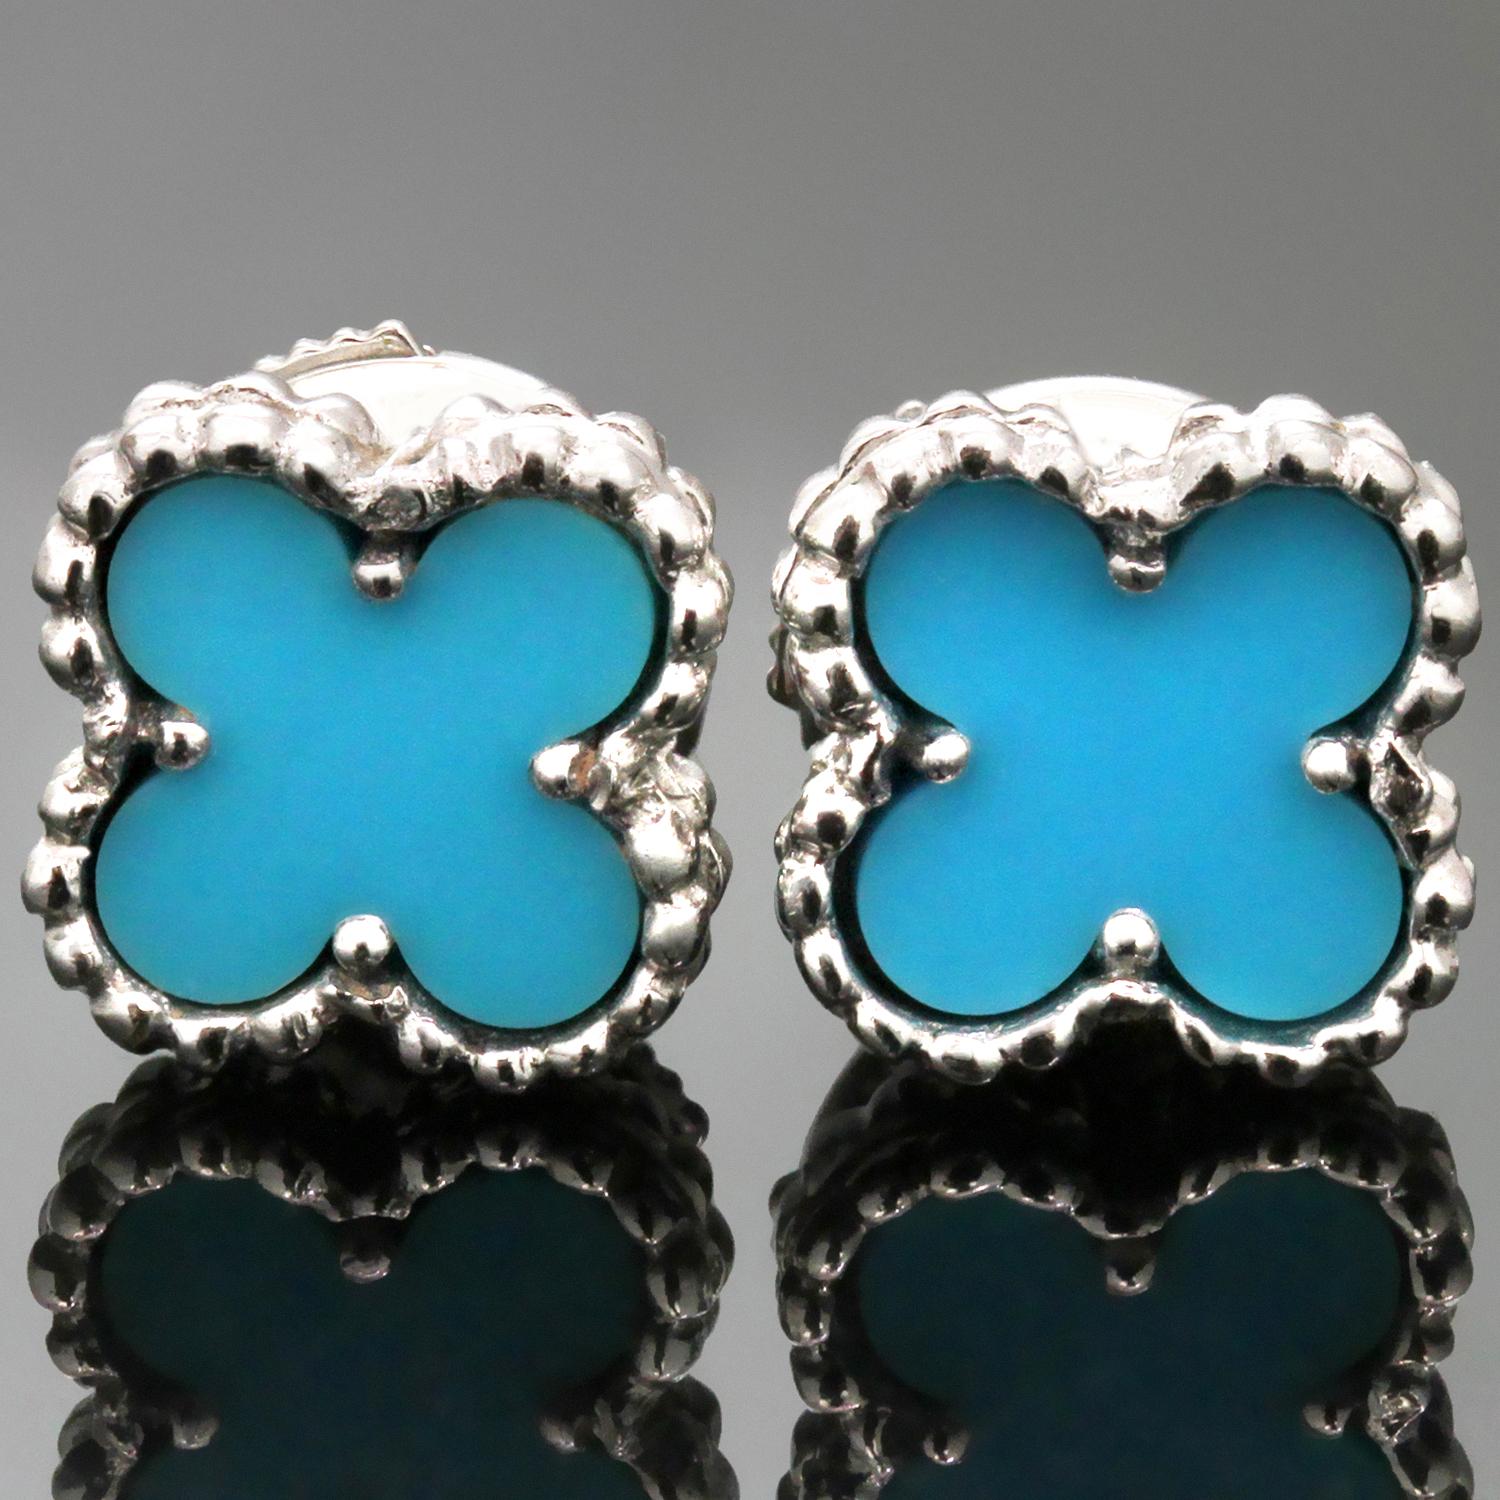 These stunning Van Cleef & Arpels stud earrings from the iconic Sweet Alhambra collection feature the lucky clover design crafted in 18k yellow gold and set with blue turquoise. Made in France circa 2000s. Measurements: 0.38